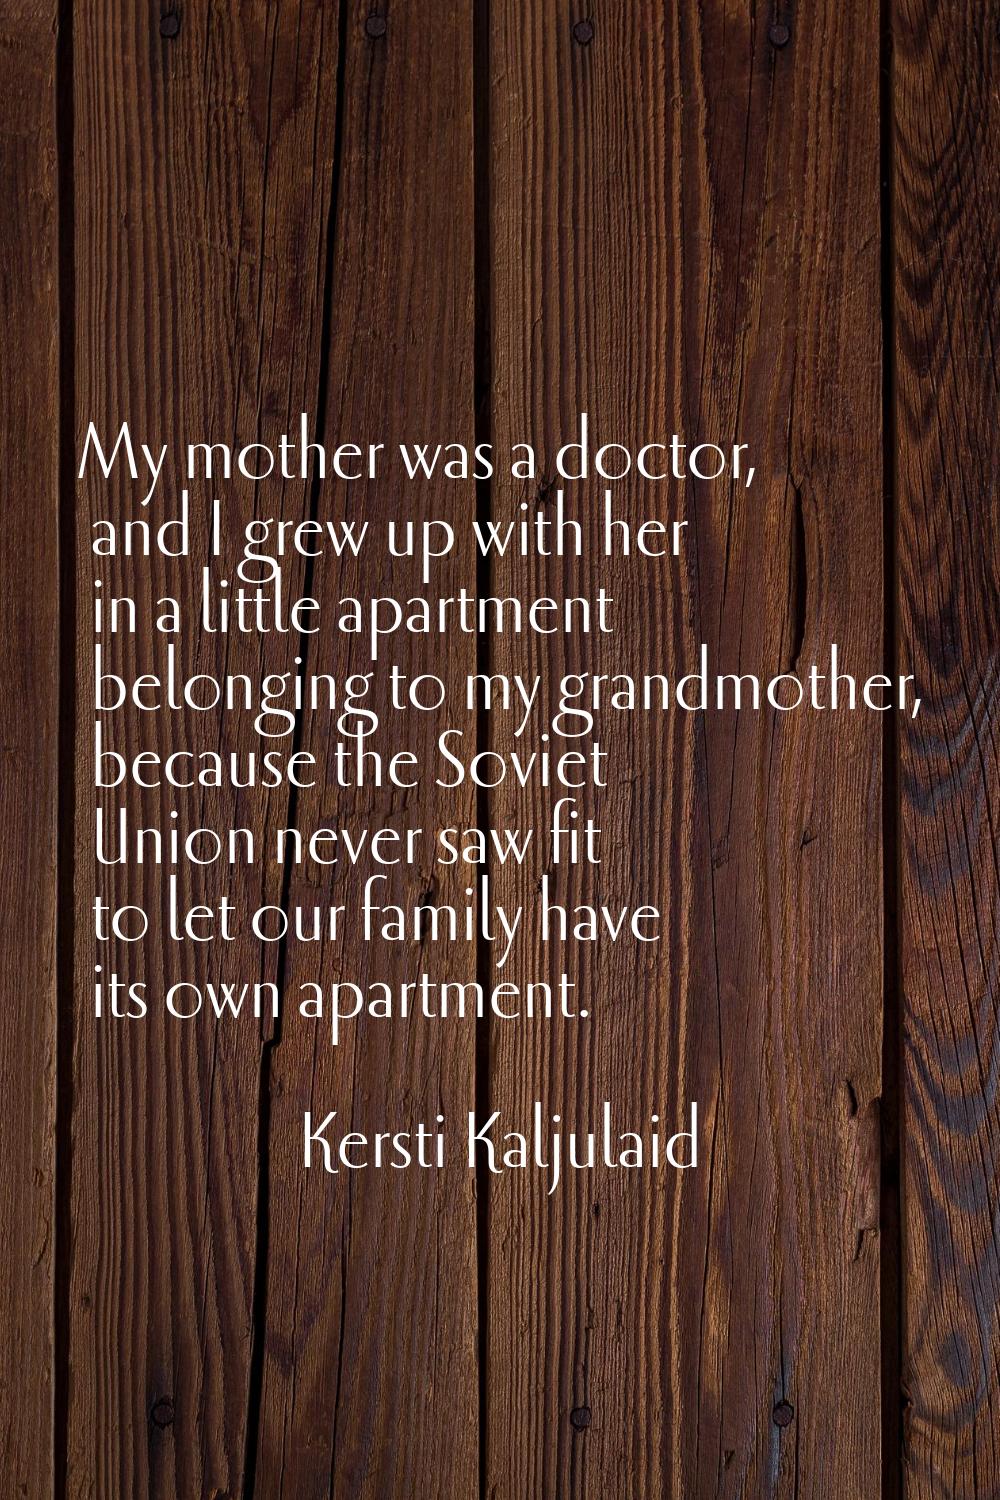 My mother was a doctor, and I grew up with her in a little apartment belonging to my grandmother, b